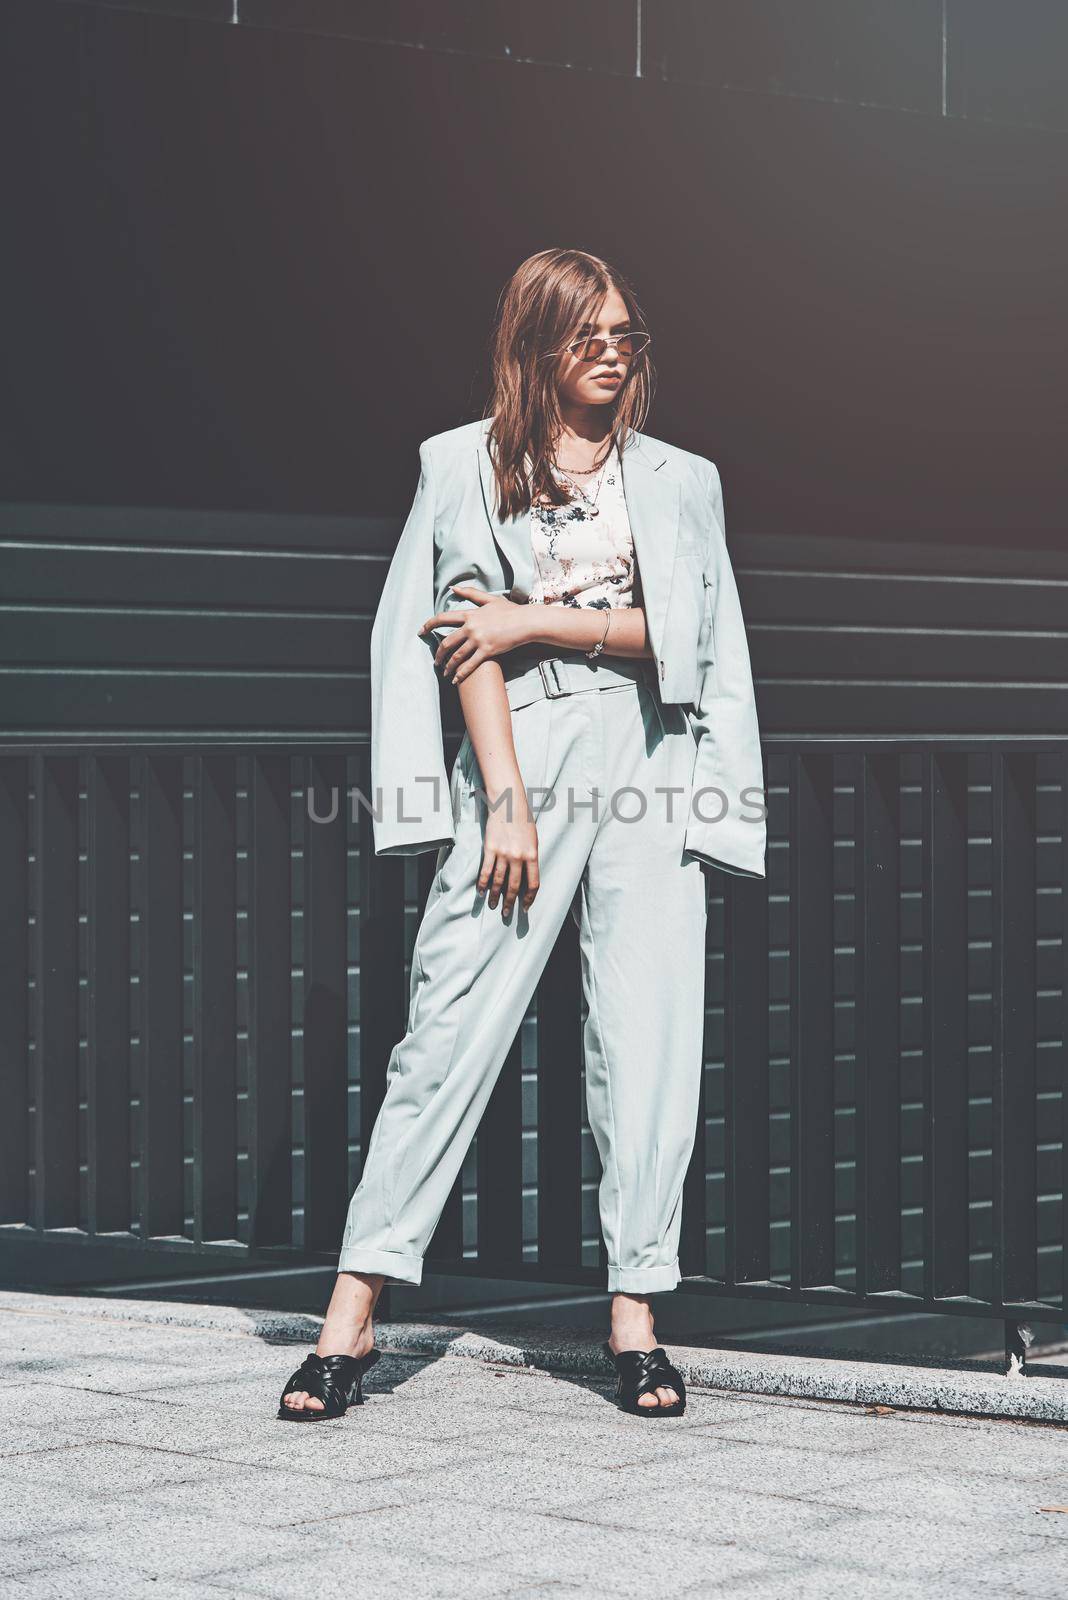 Fashion portrait of young woman wearing sunglasses, top, slingbacks, blue suit. Young beautiful happy model posing near gray metal grid by Ashtray25